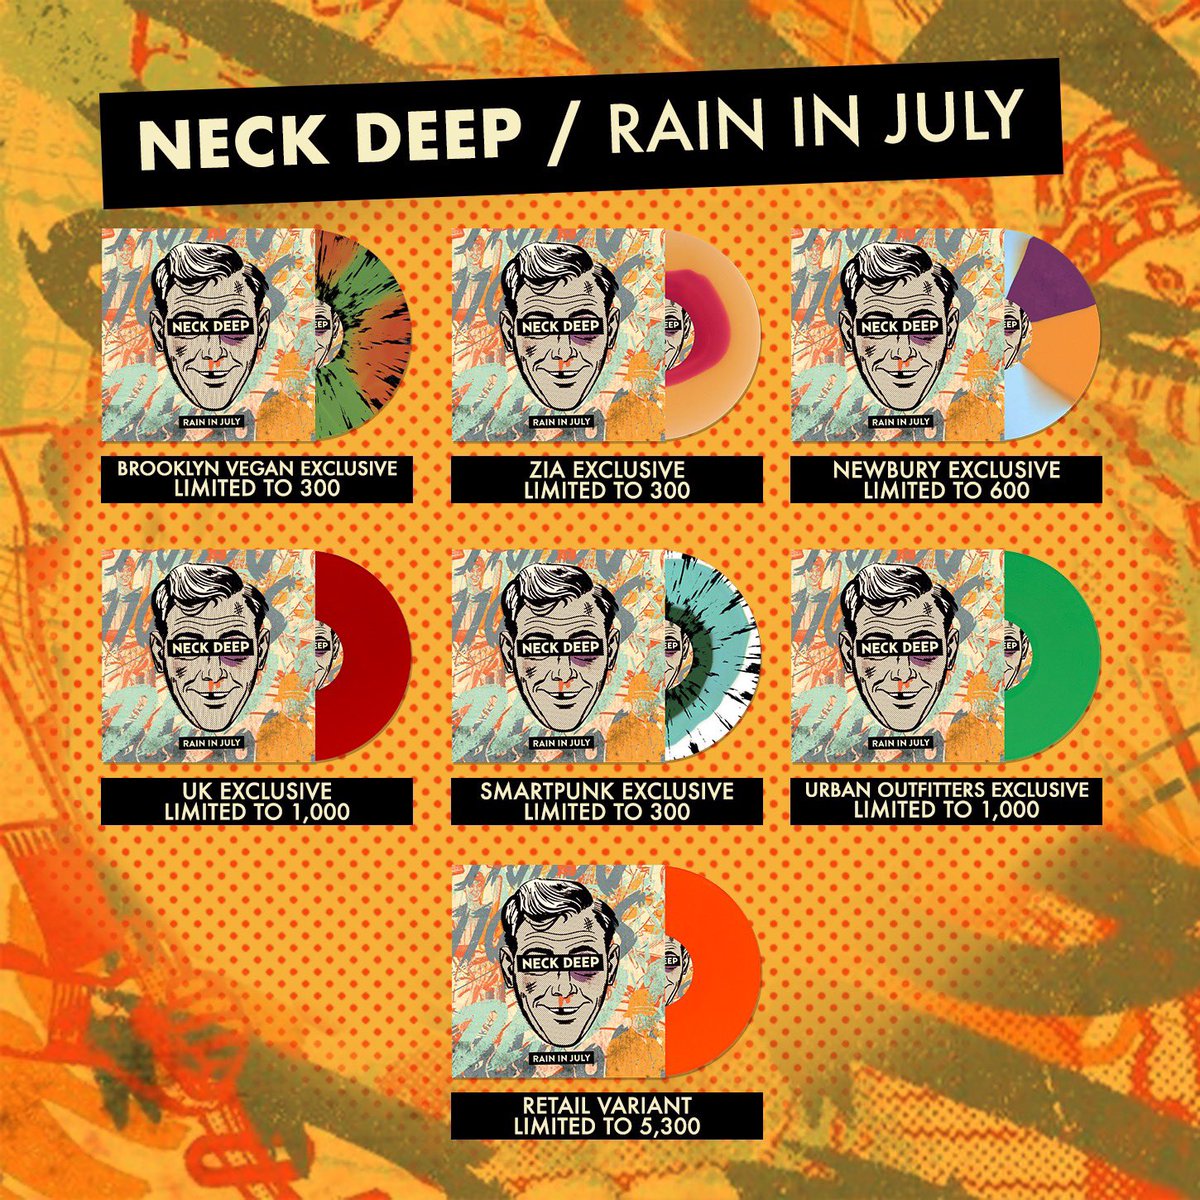 Celebrating 10 years of @NeckDeepUK’s Rain In July in a big way! These beaut exclusive vinyl variants are available to pre-order NOW. ffm.to/rijretail